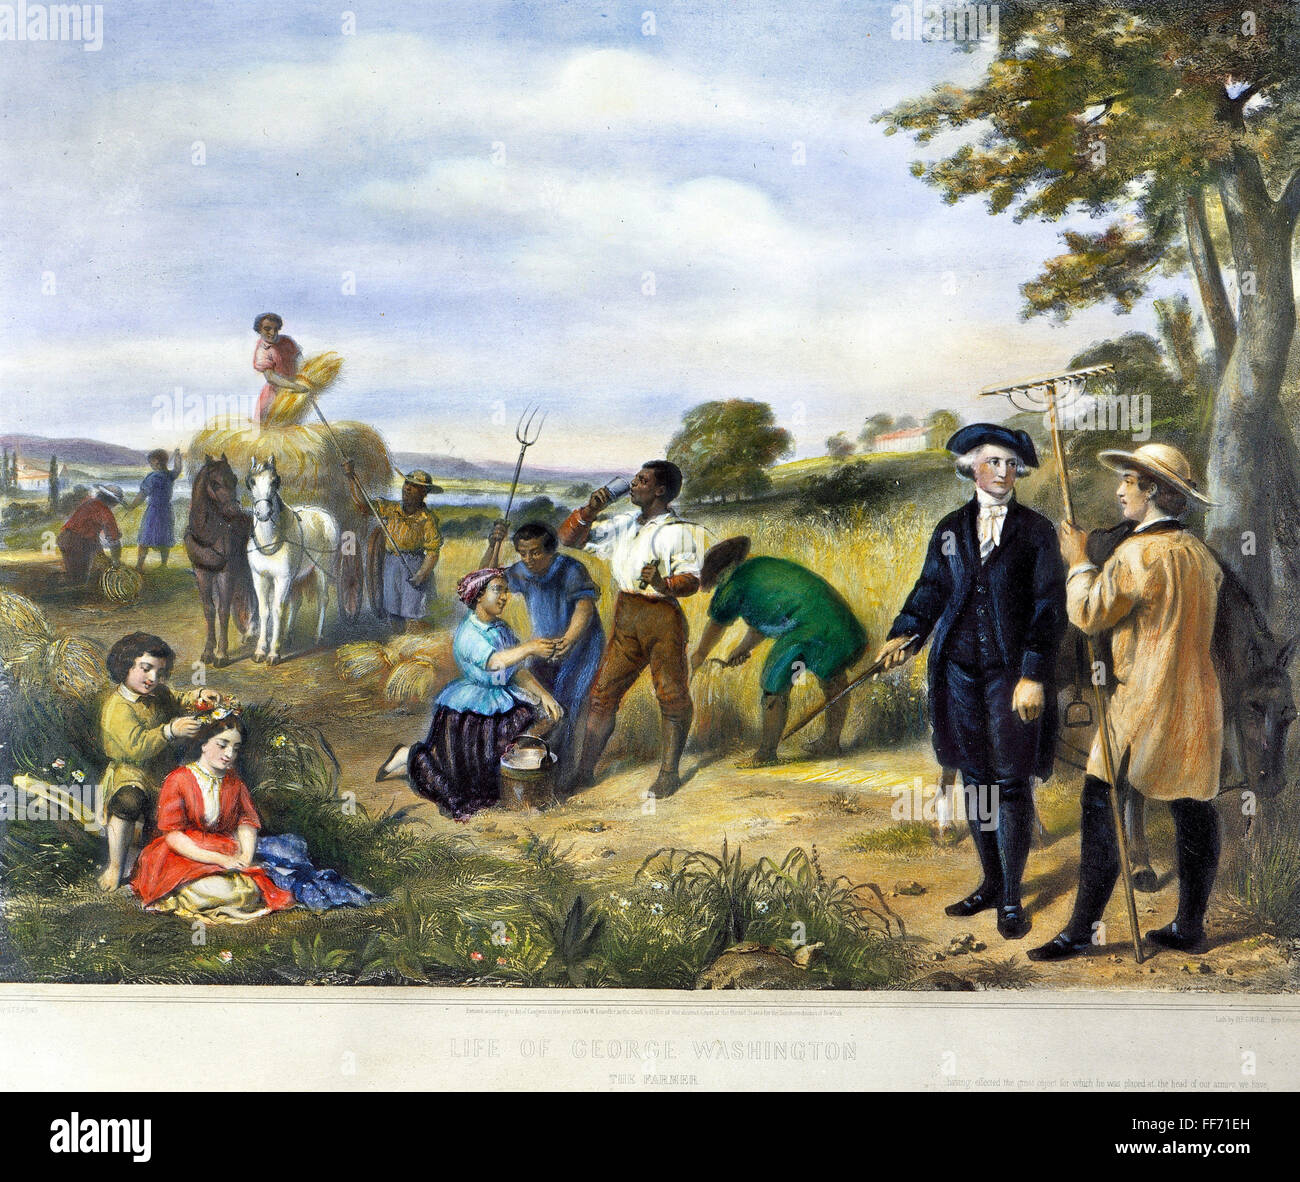 WASHINGTON THE FARMER. /nGeorge Washington in the fields of Mount Vernon, his plantation in Fairfax County, Virginia. In the lower left corner are his stepchildren, John and Martha Parke Custis. Lithograph, 1853, after a painting by Junius Brutus Stearns. Stock Photo